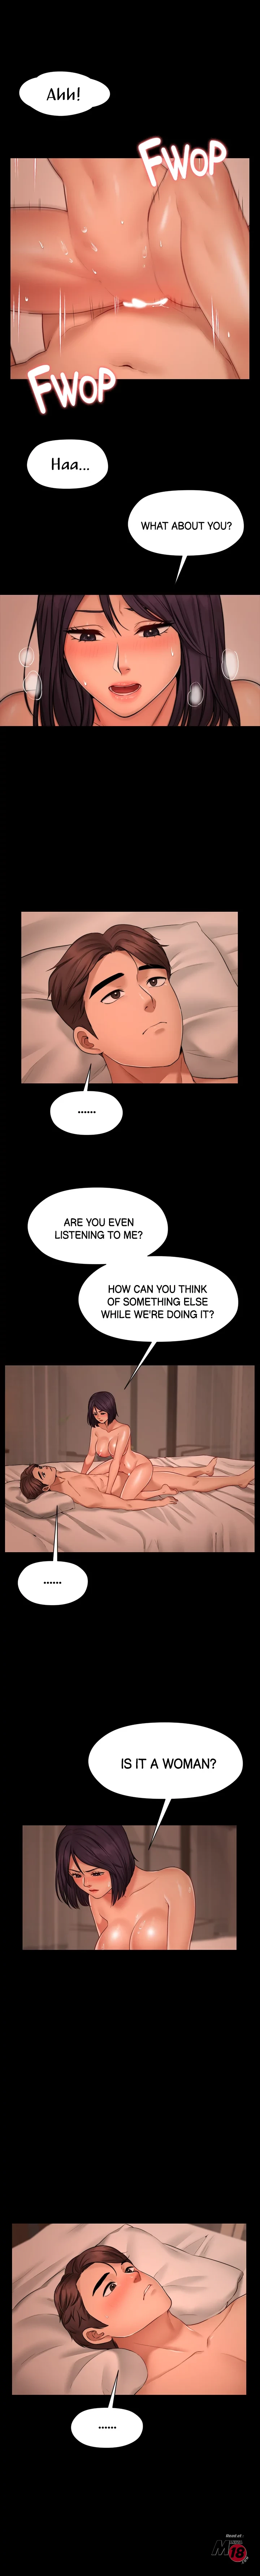 Dreaming : My Friend’s Girl - Chapter 3 Page 12